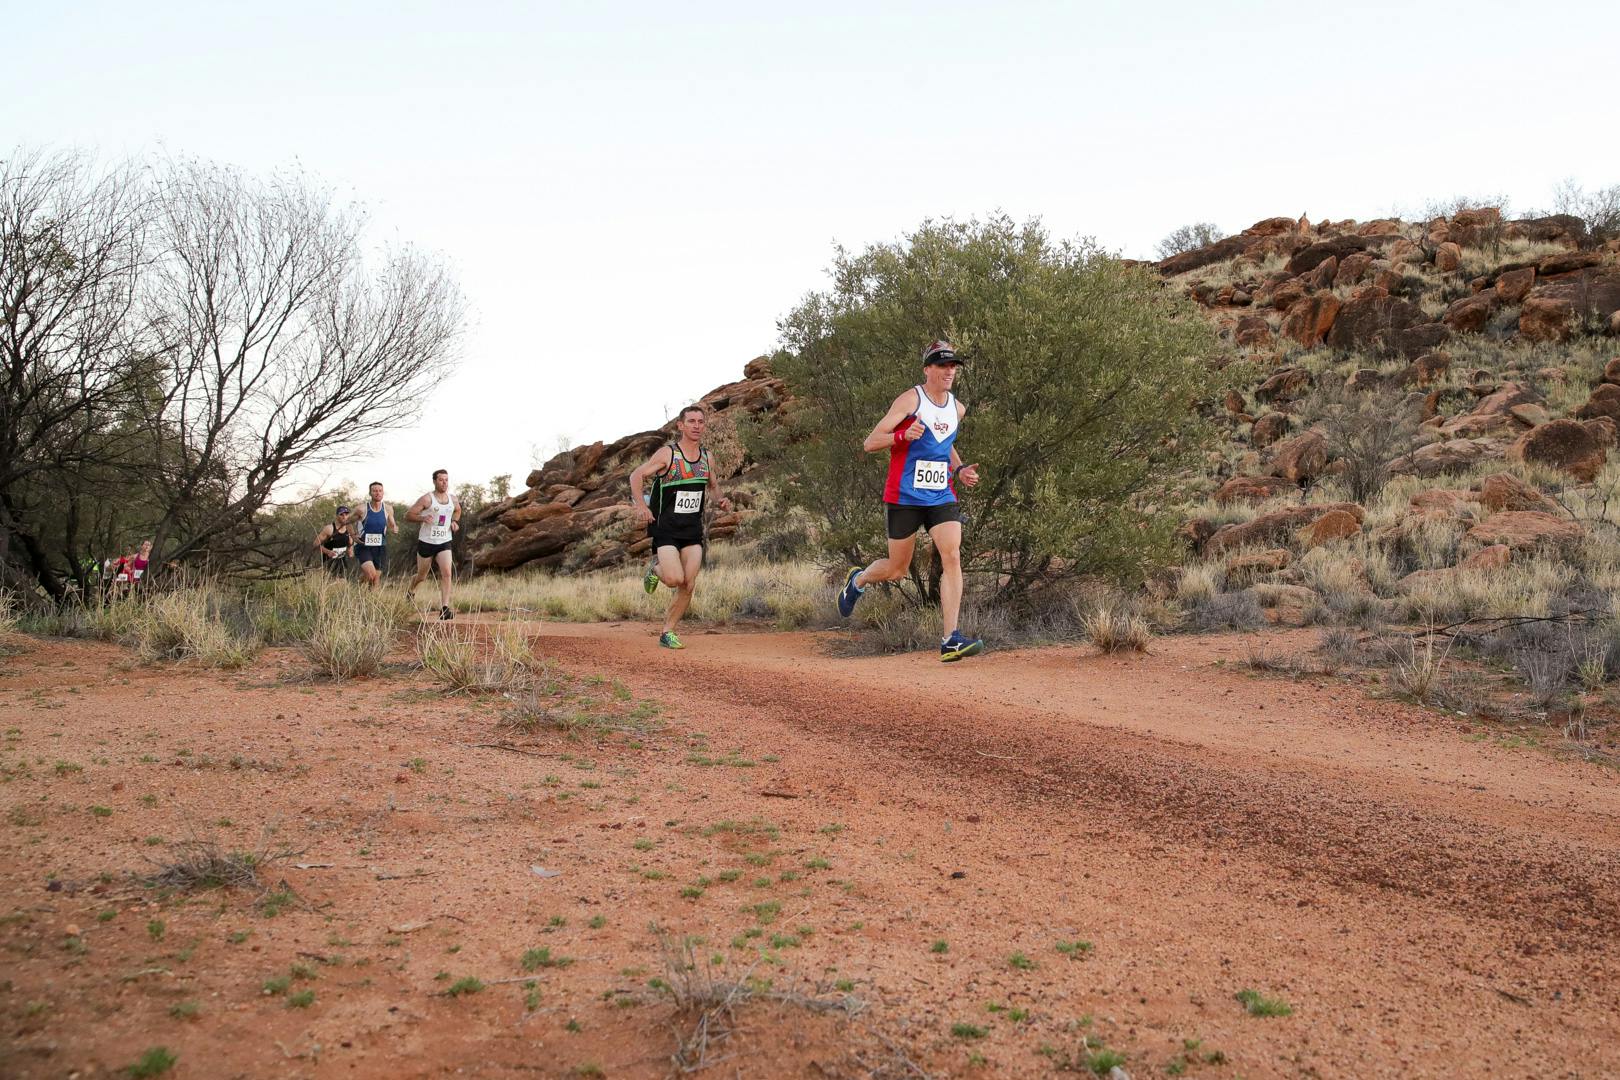 Athletes undertake the 5km run as part of the Alice Springs Masters Games